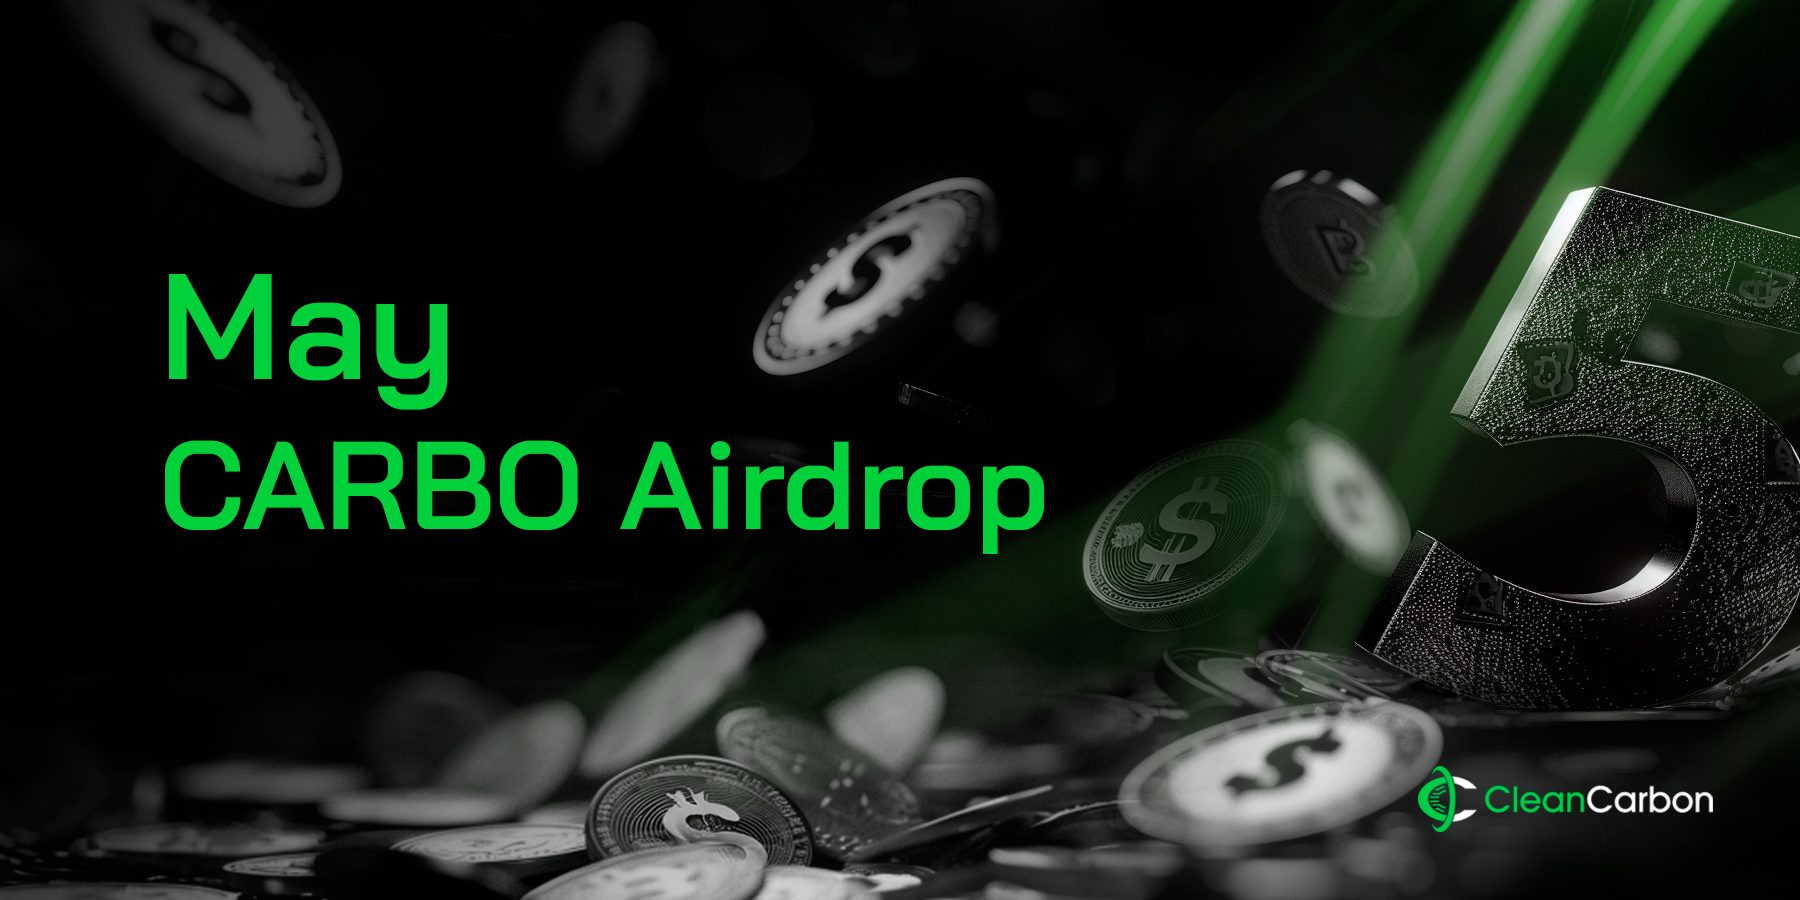 may-carbo-airdrop